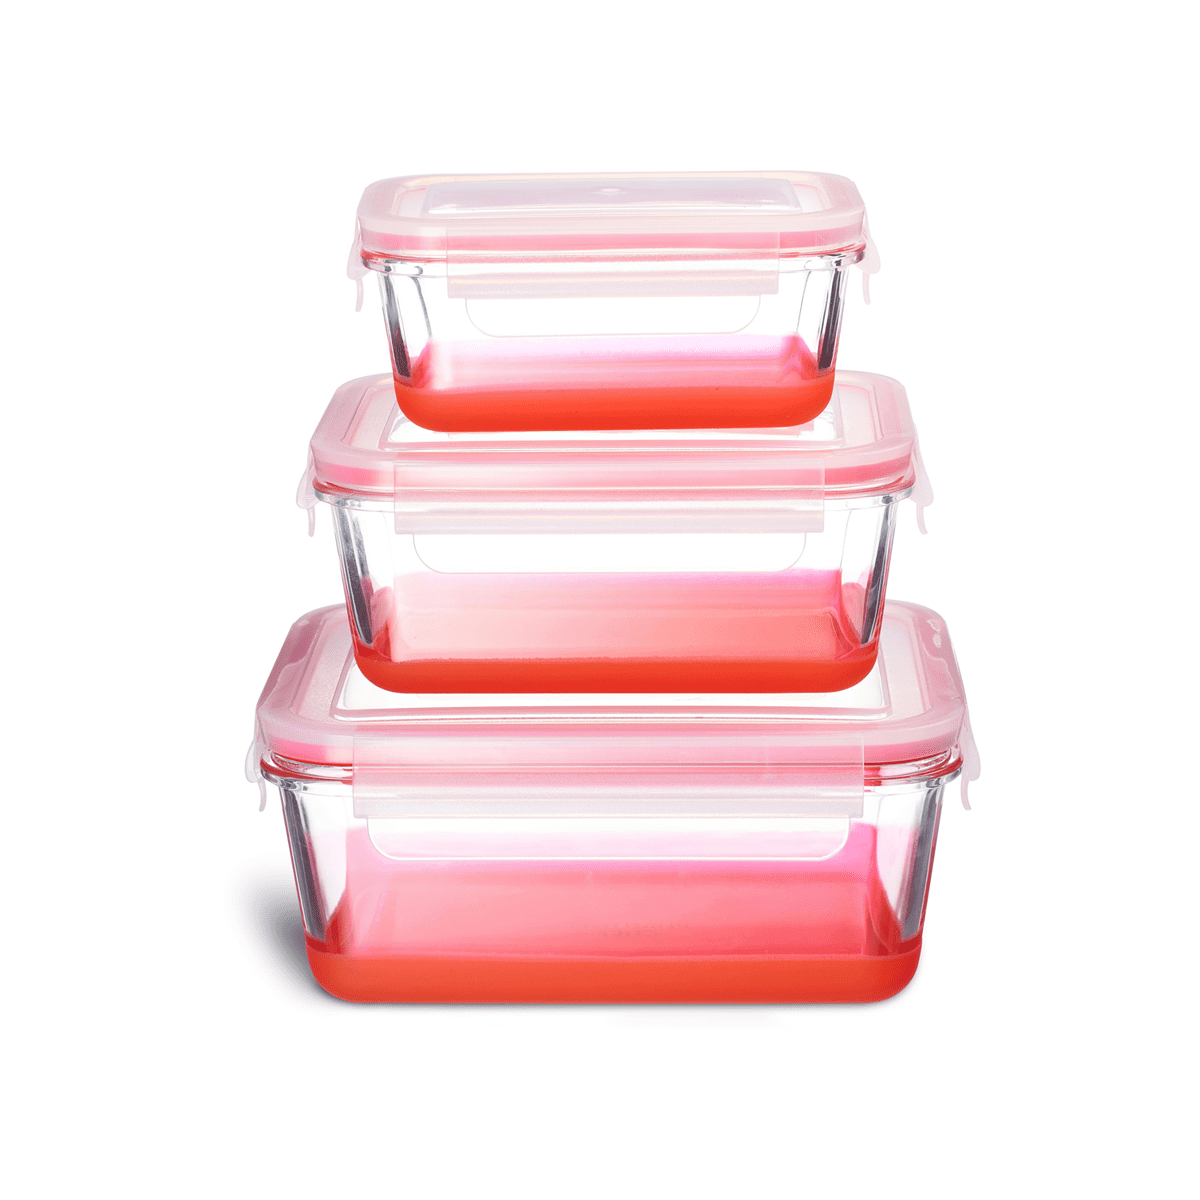 Set of 3 food storage containers, made from glass, pink